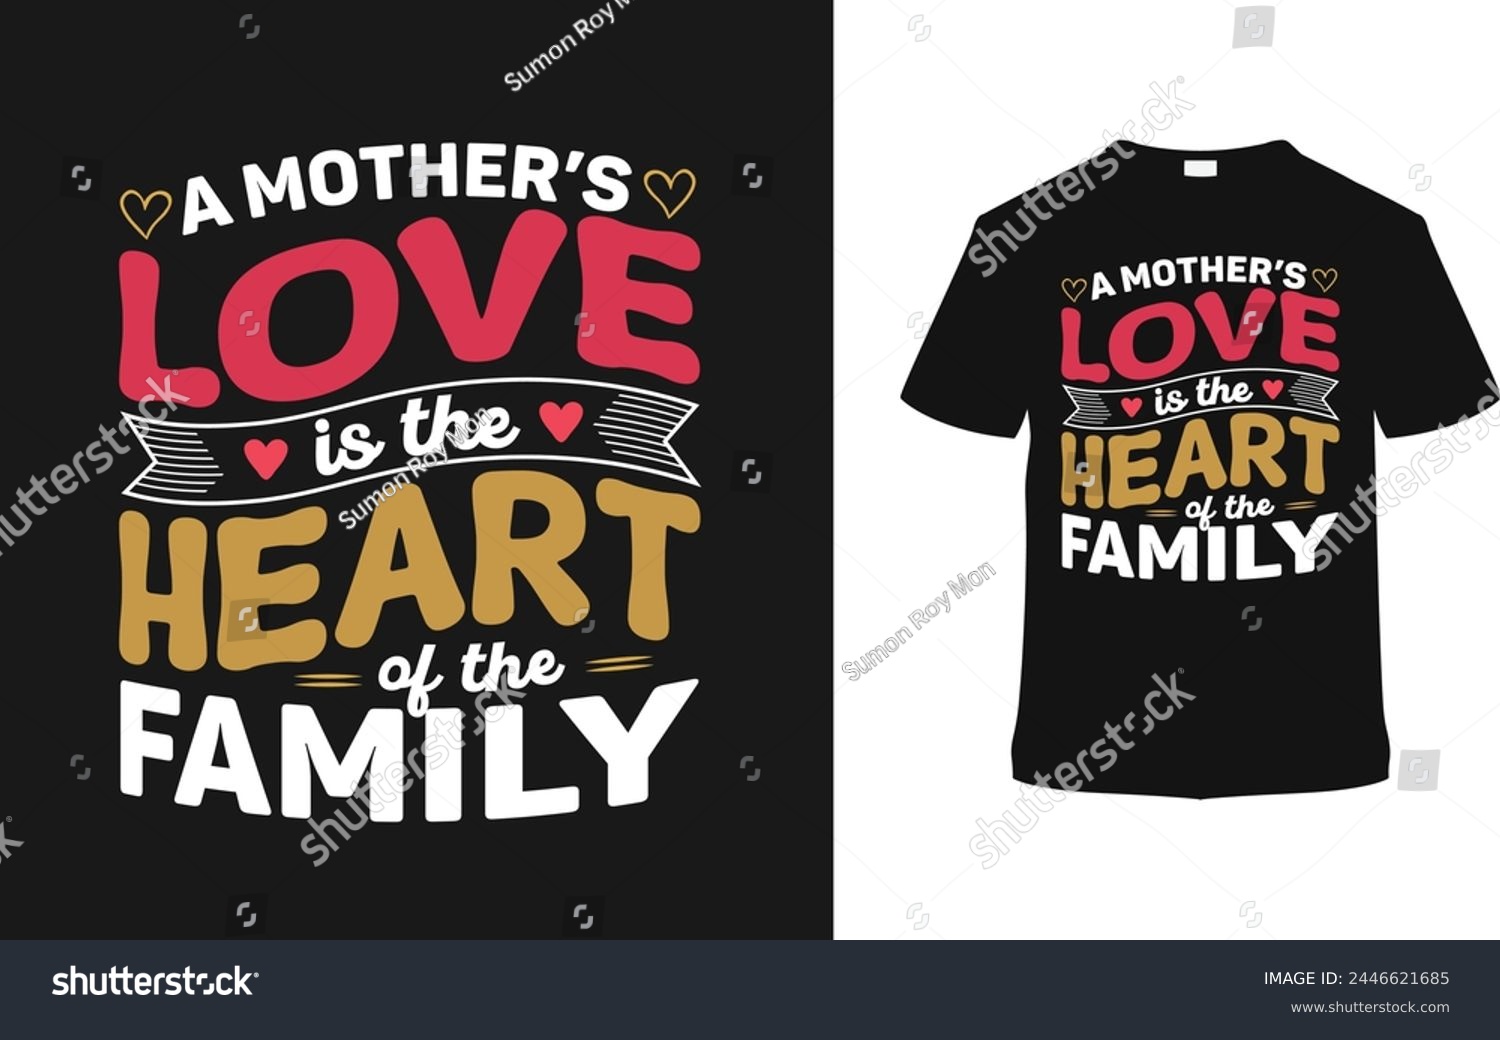 SVG of A Mother's Love Is The Heart Of The Family. Mother's day t shirt design, vector illustration, graphic template, print on demand, typography, vintage, eps 10, textile fabrics, retro style, element, tee svg